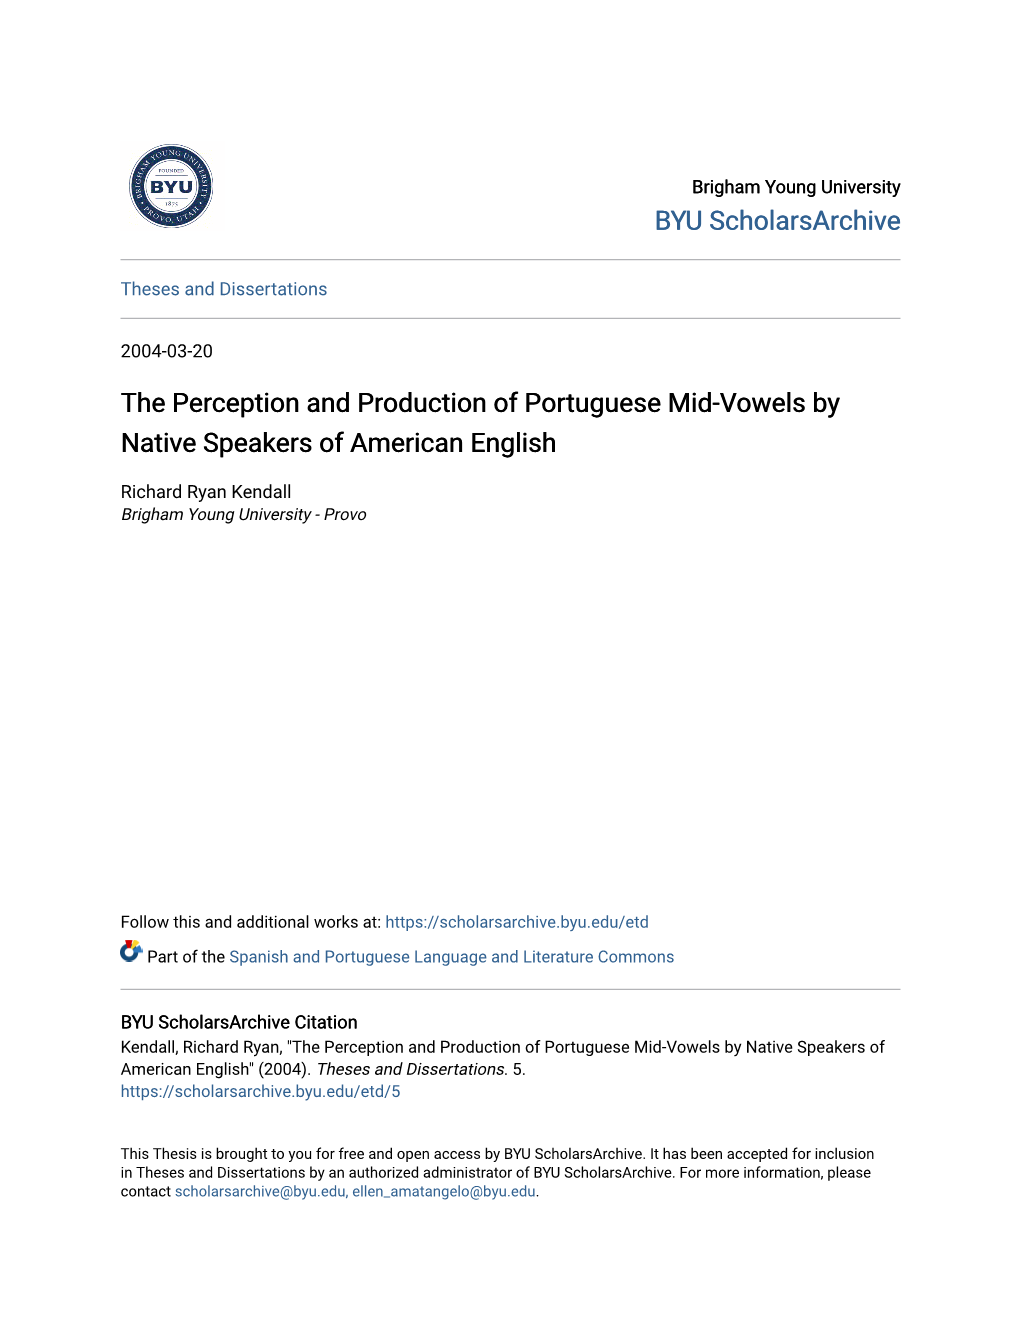 The Perception and Production of Portuguese Mid-Vowels by Native Speakers of American English